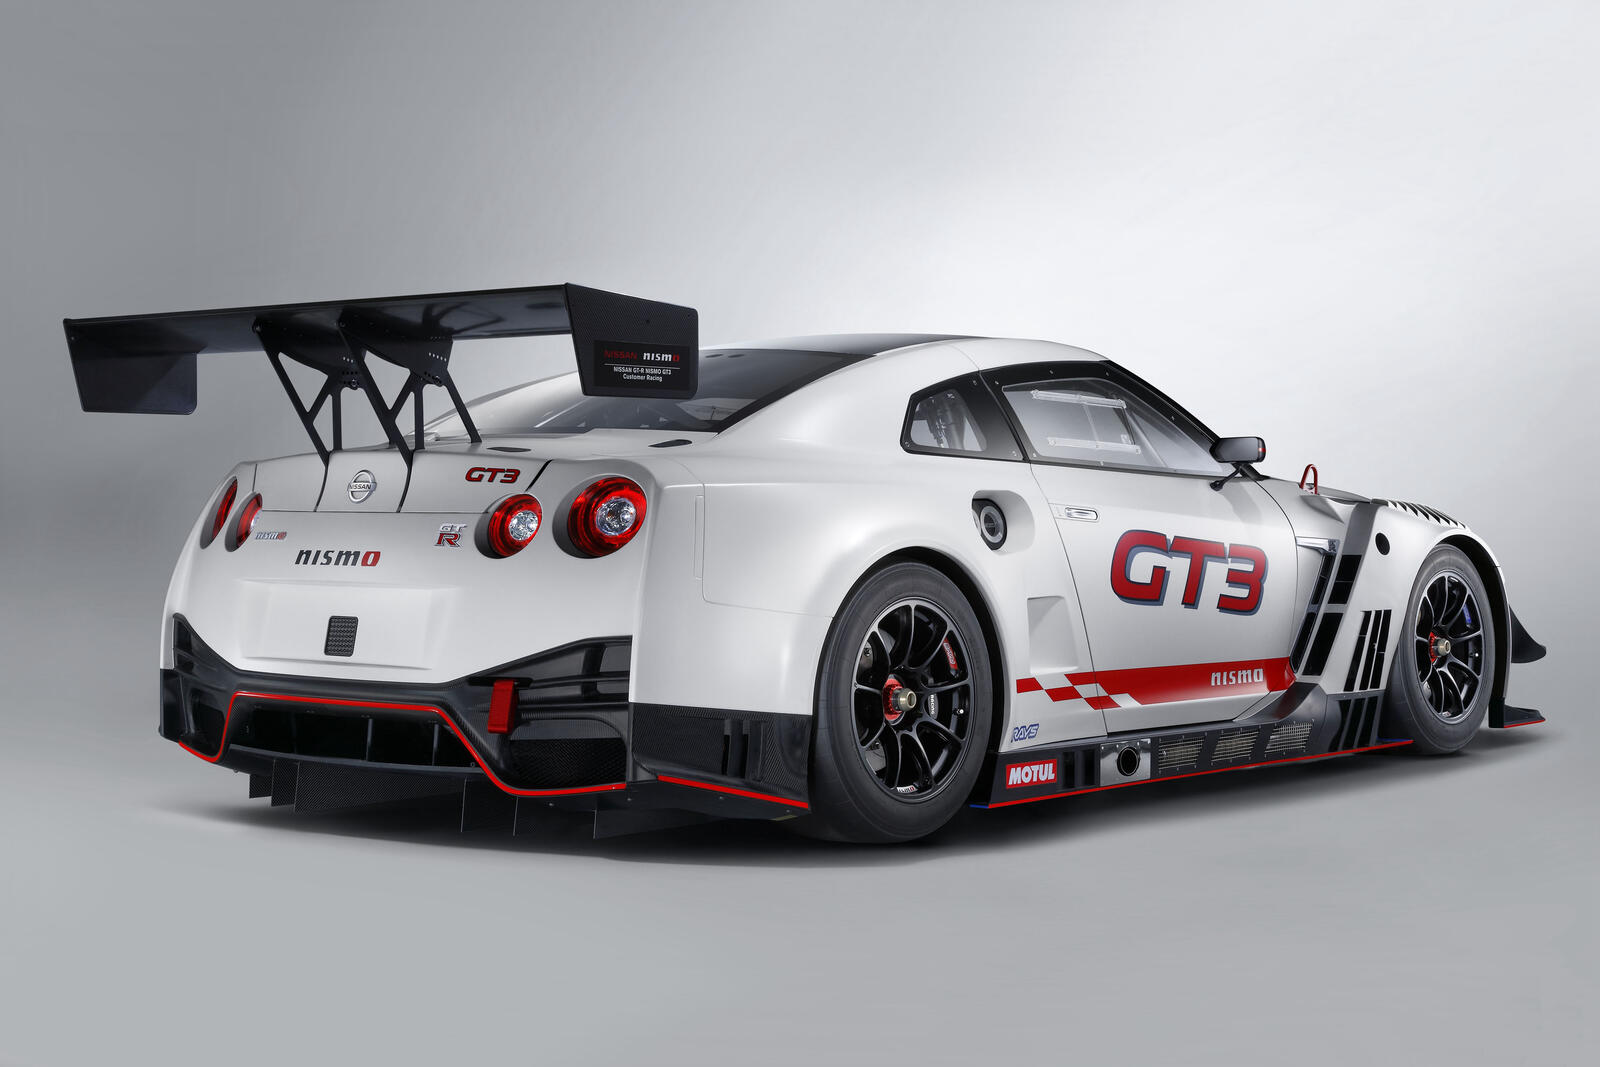 Wallpapers Nissan cars 2018 cars on the desktop